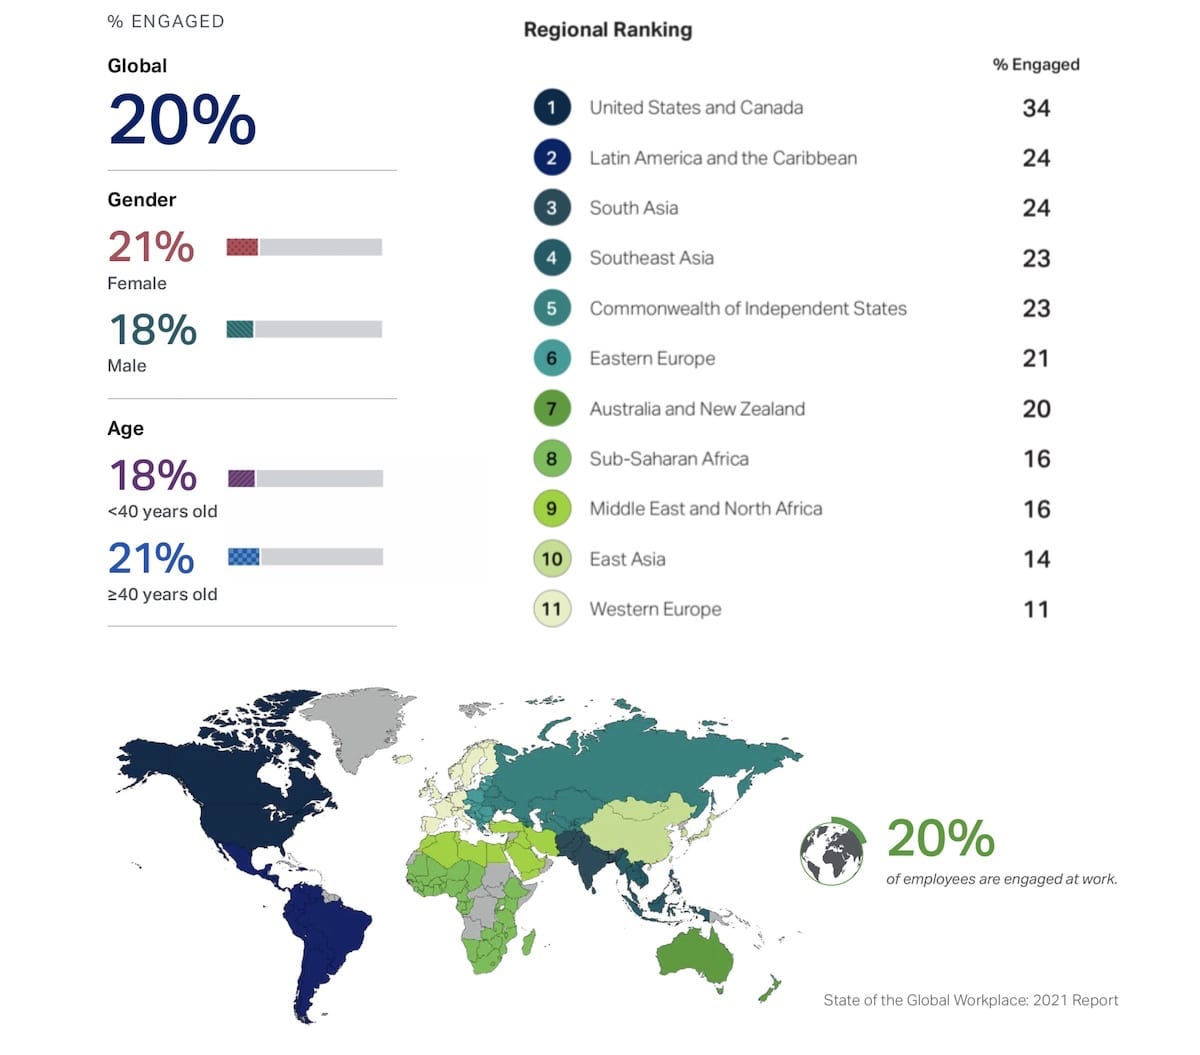 Employee engagement by regions of the world